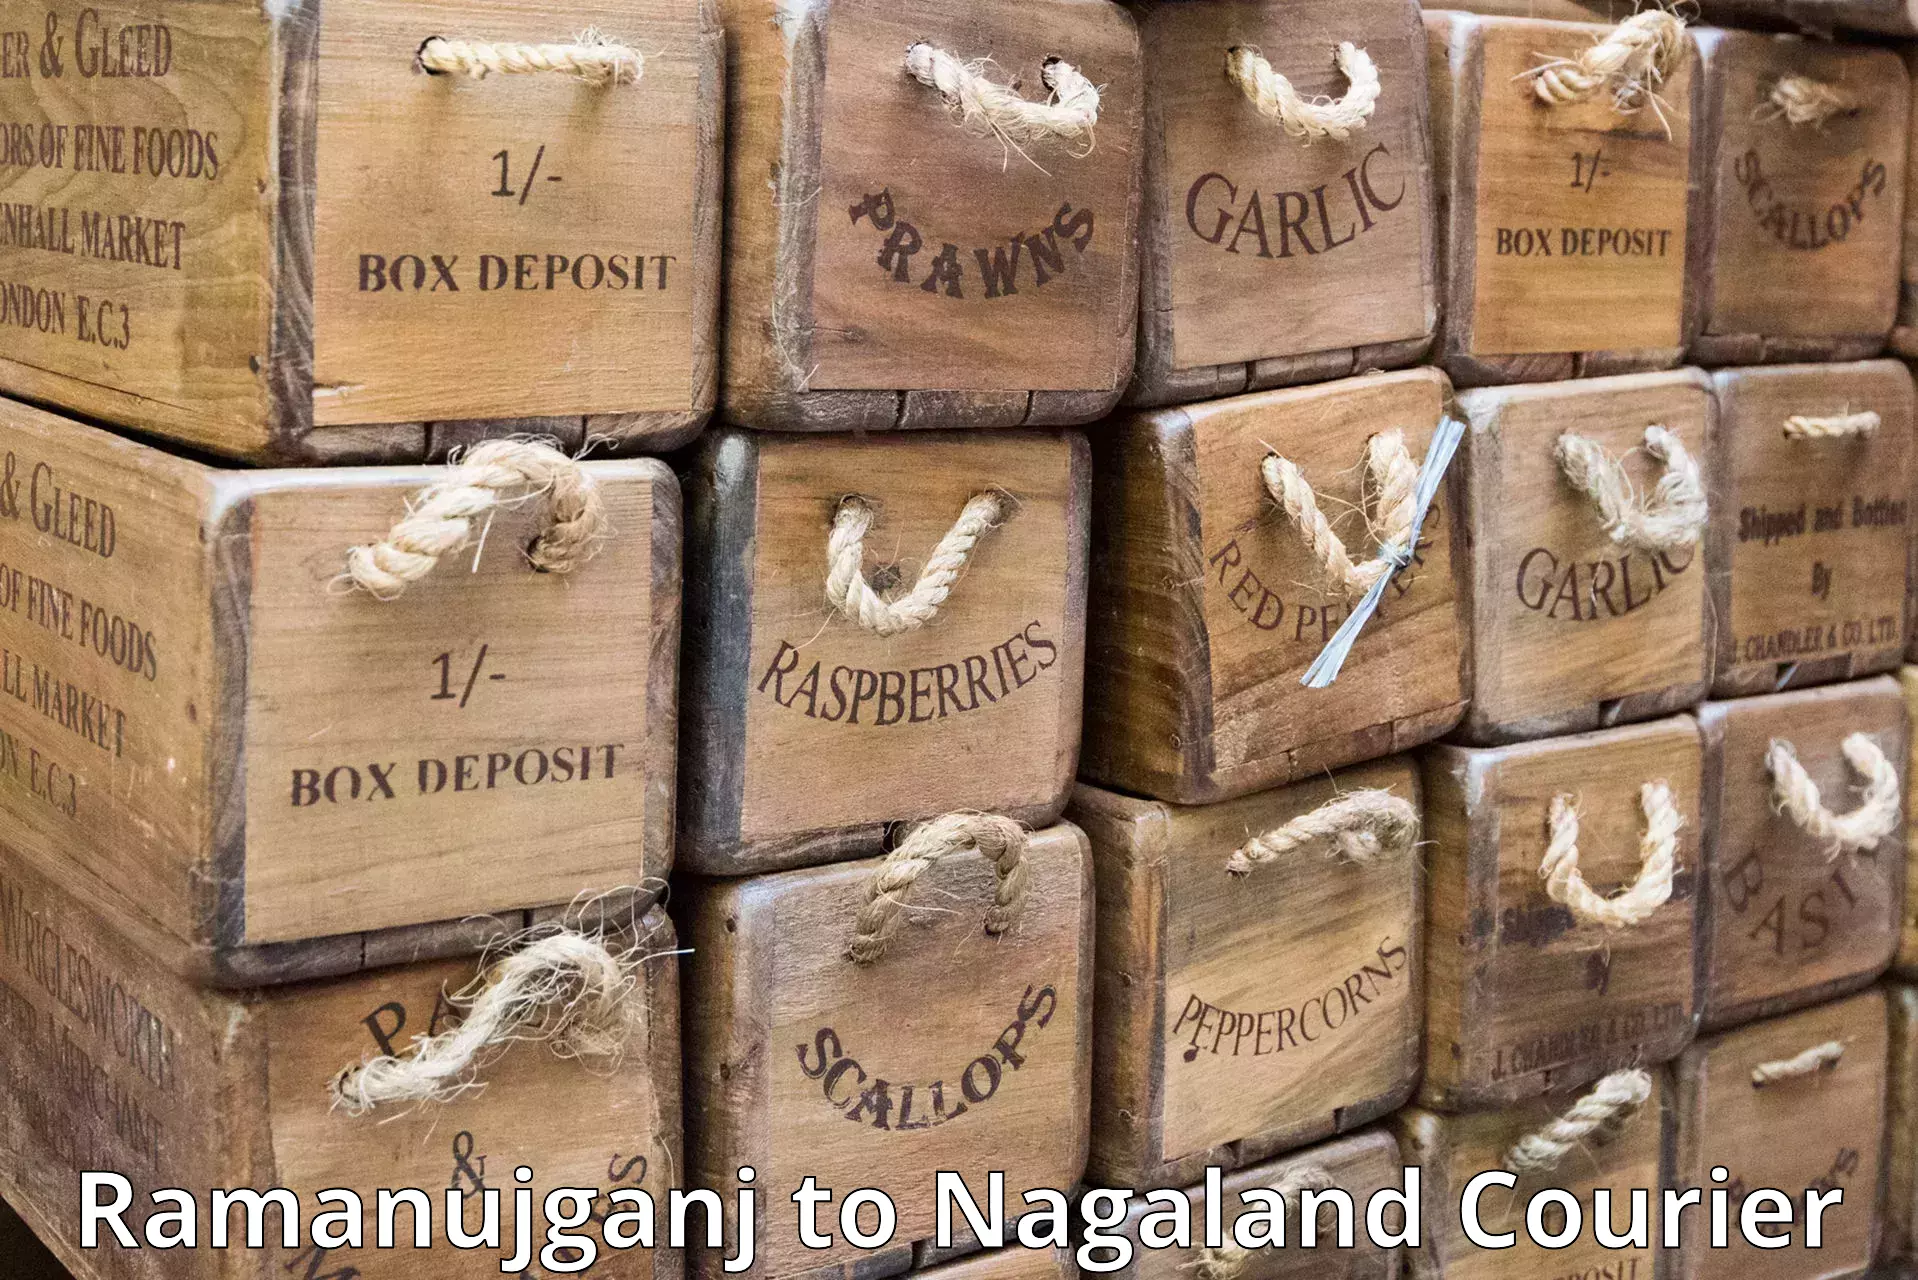 Flexible delivery schedules Ramanujganj to Nagaland